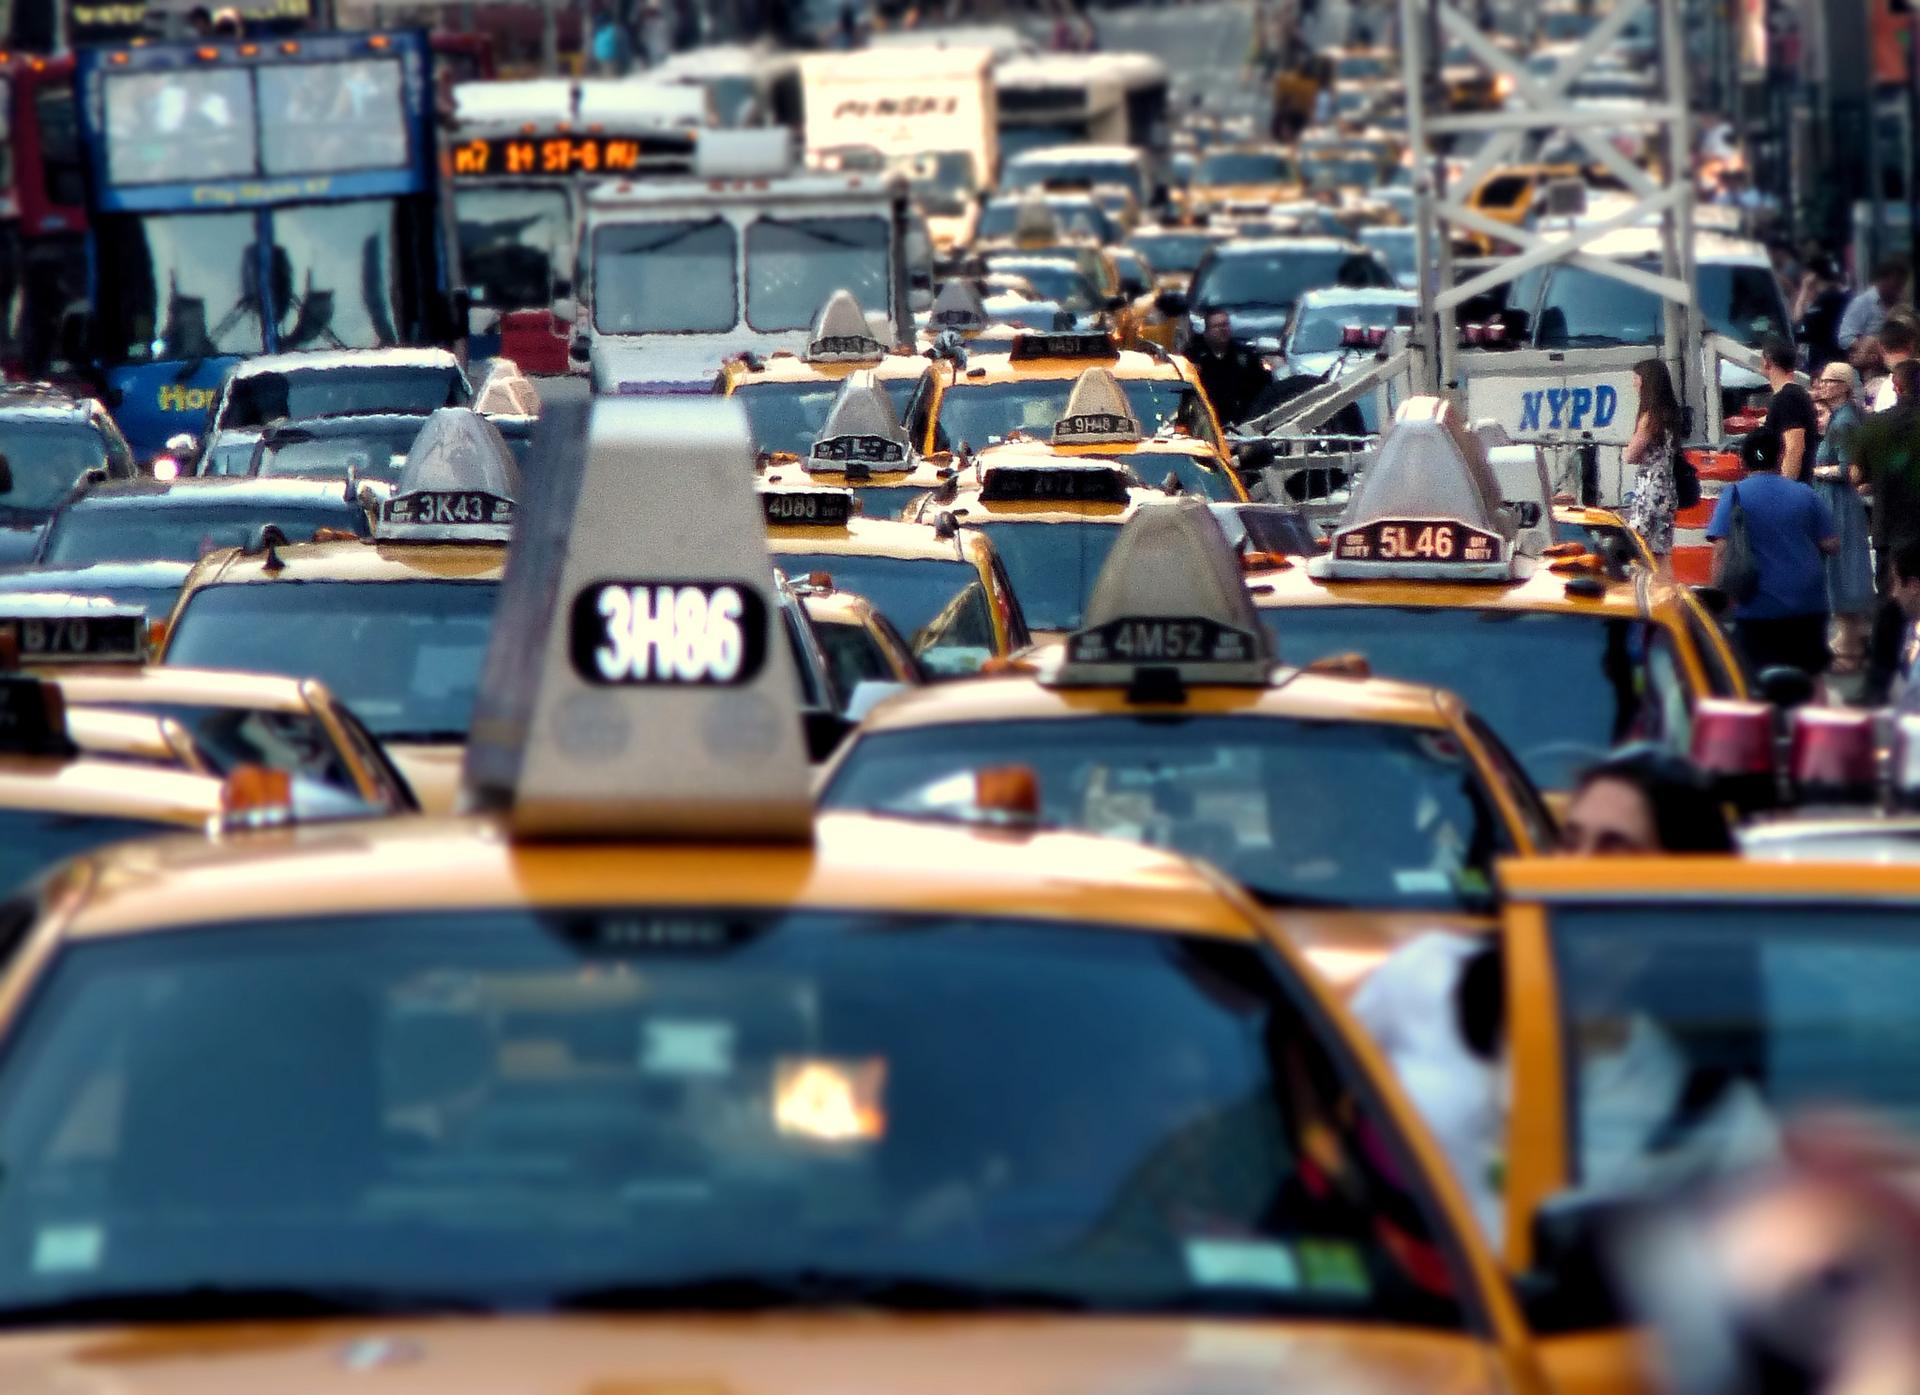 Traffic piles up in New York City's Times Square. New York is one of the cities that attempted to introduce "congestion pricing" — fees for driving at peak hours — but the plan was defeated.